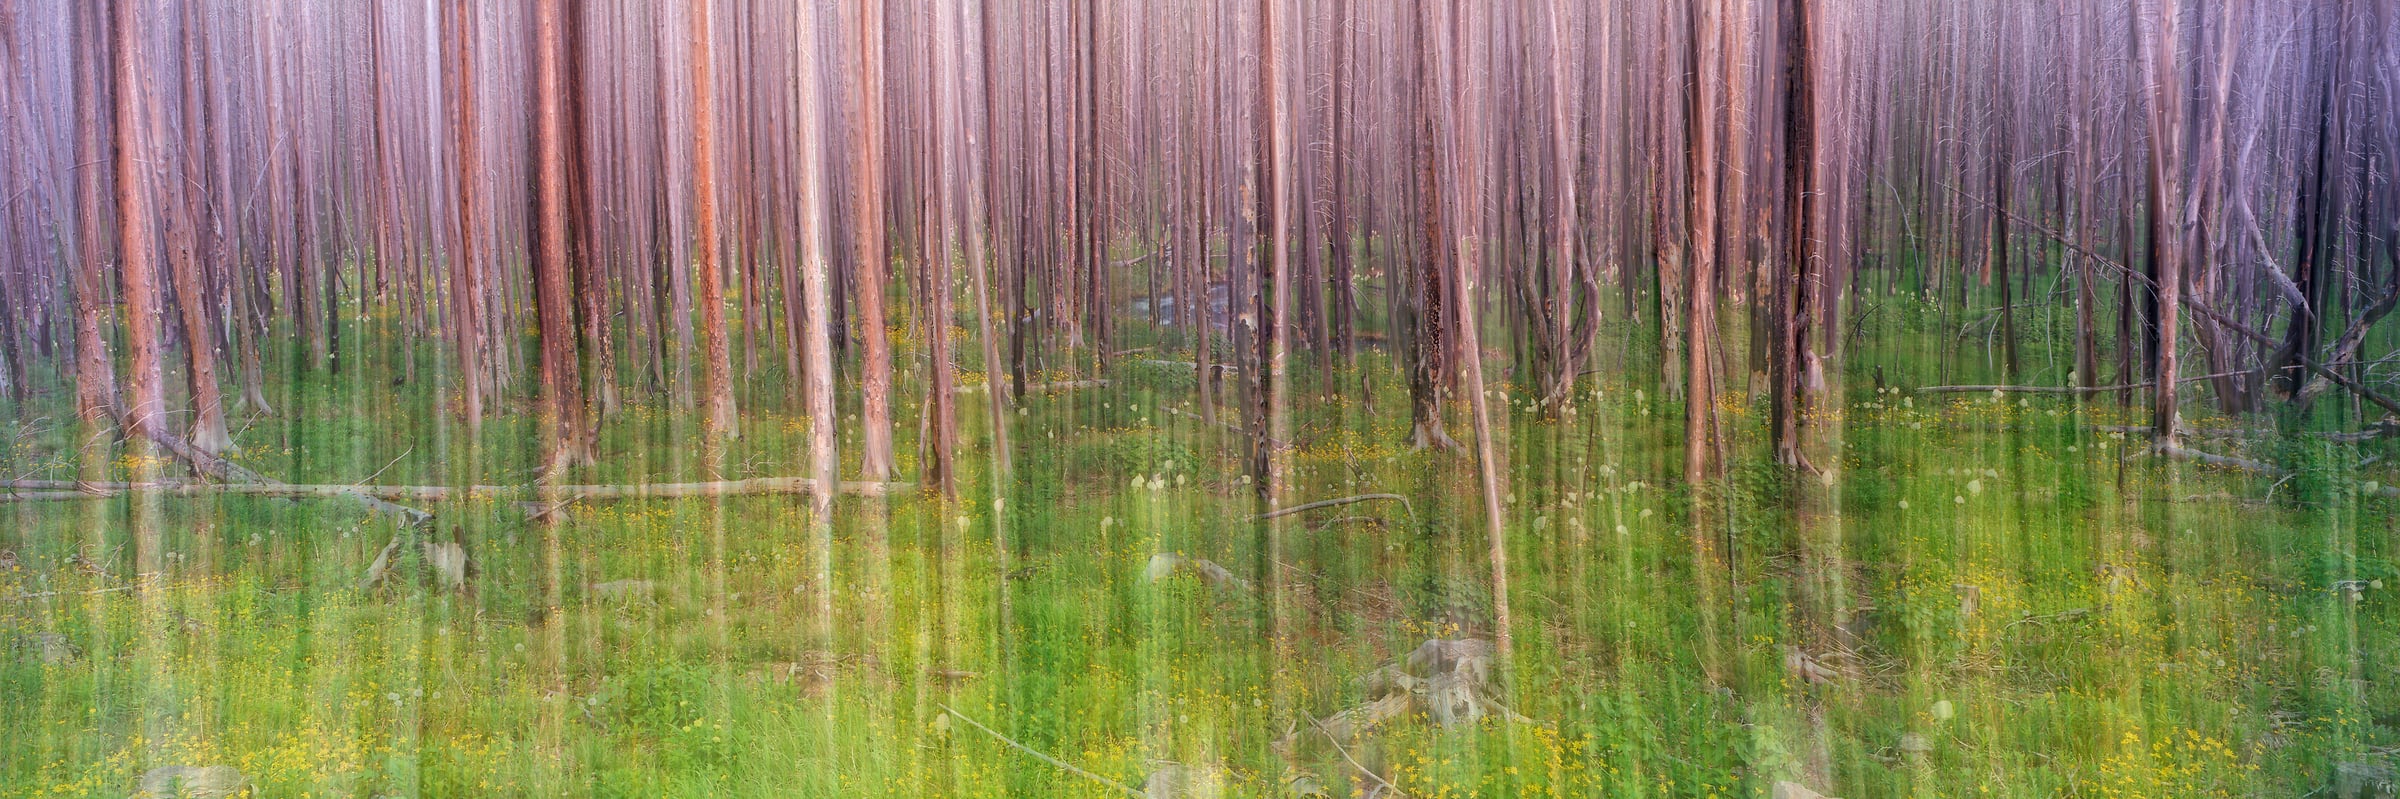 335 megapixels! A very high resolution, large-format VAST photo print of an abstract forest scene from artist Scott Dimond's ICMMFF series.